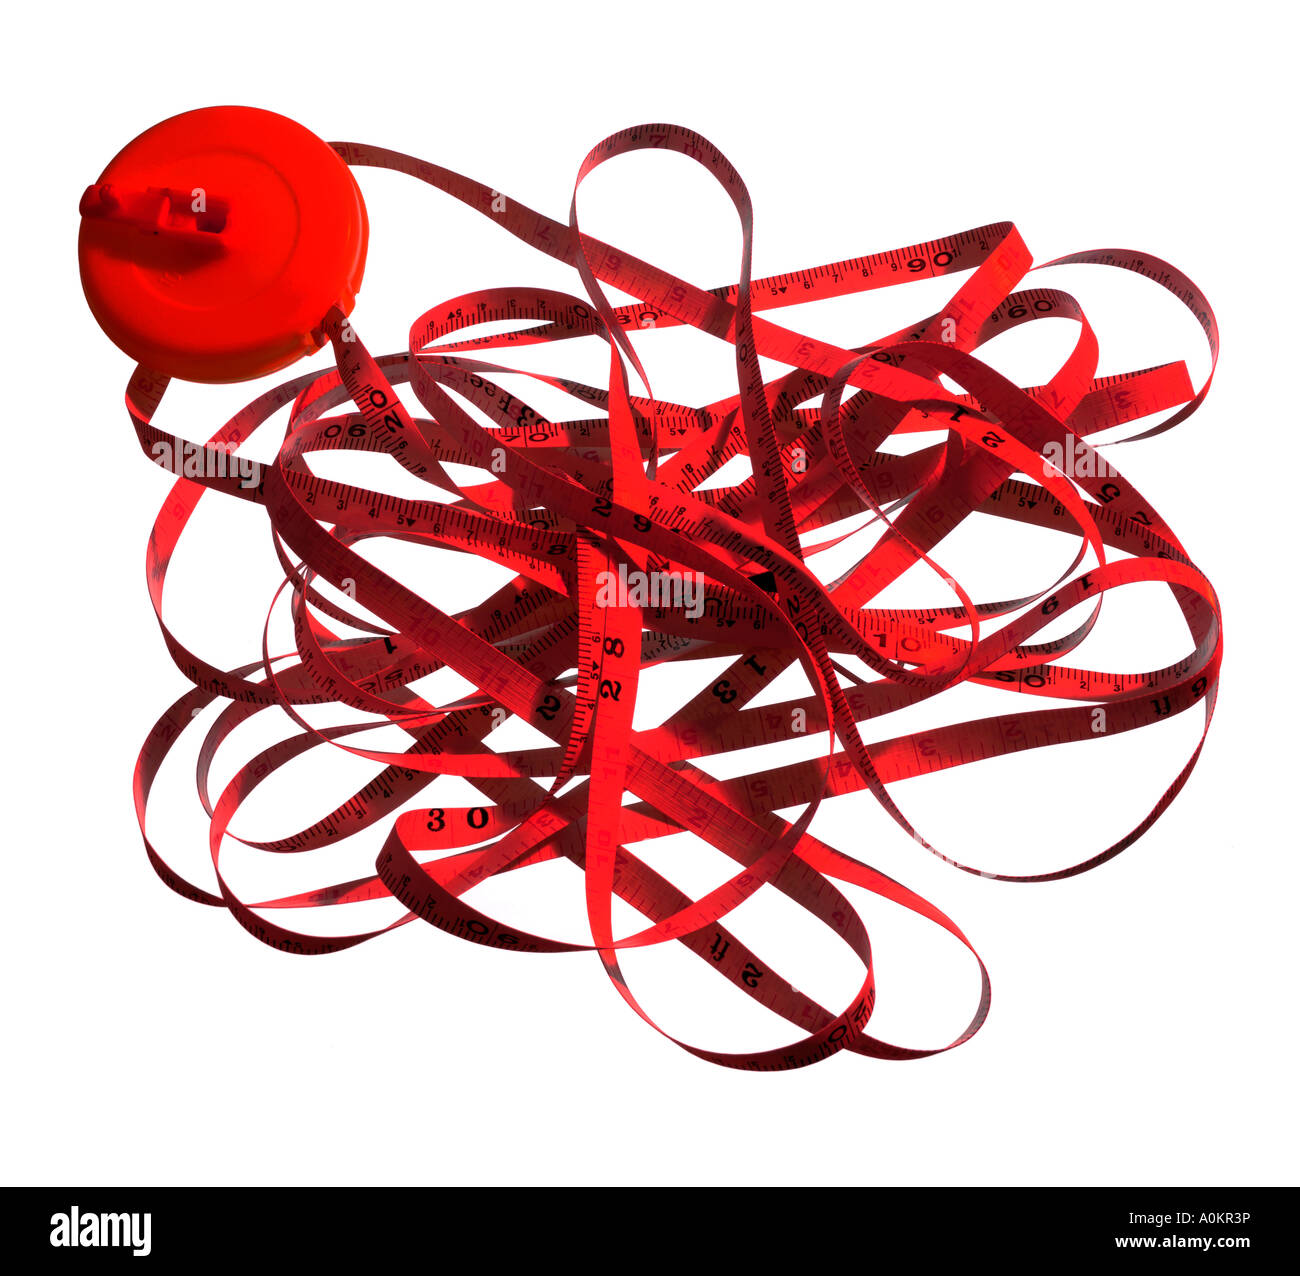 Red tape concept or metaphor Stock Photo